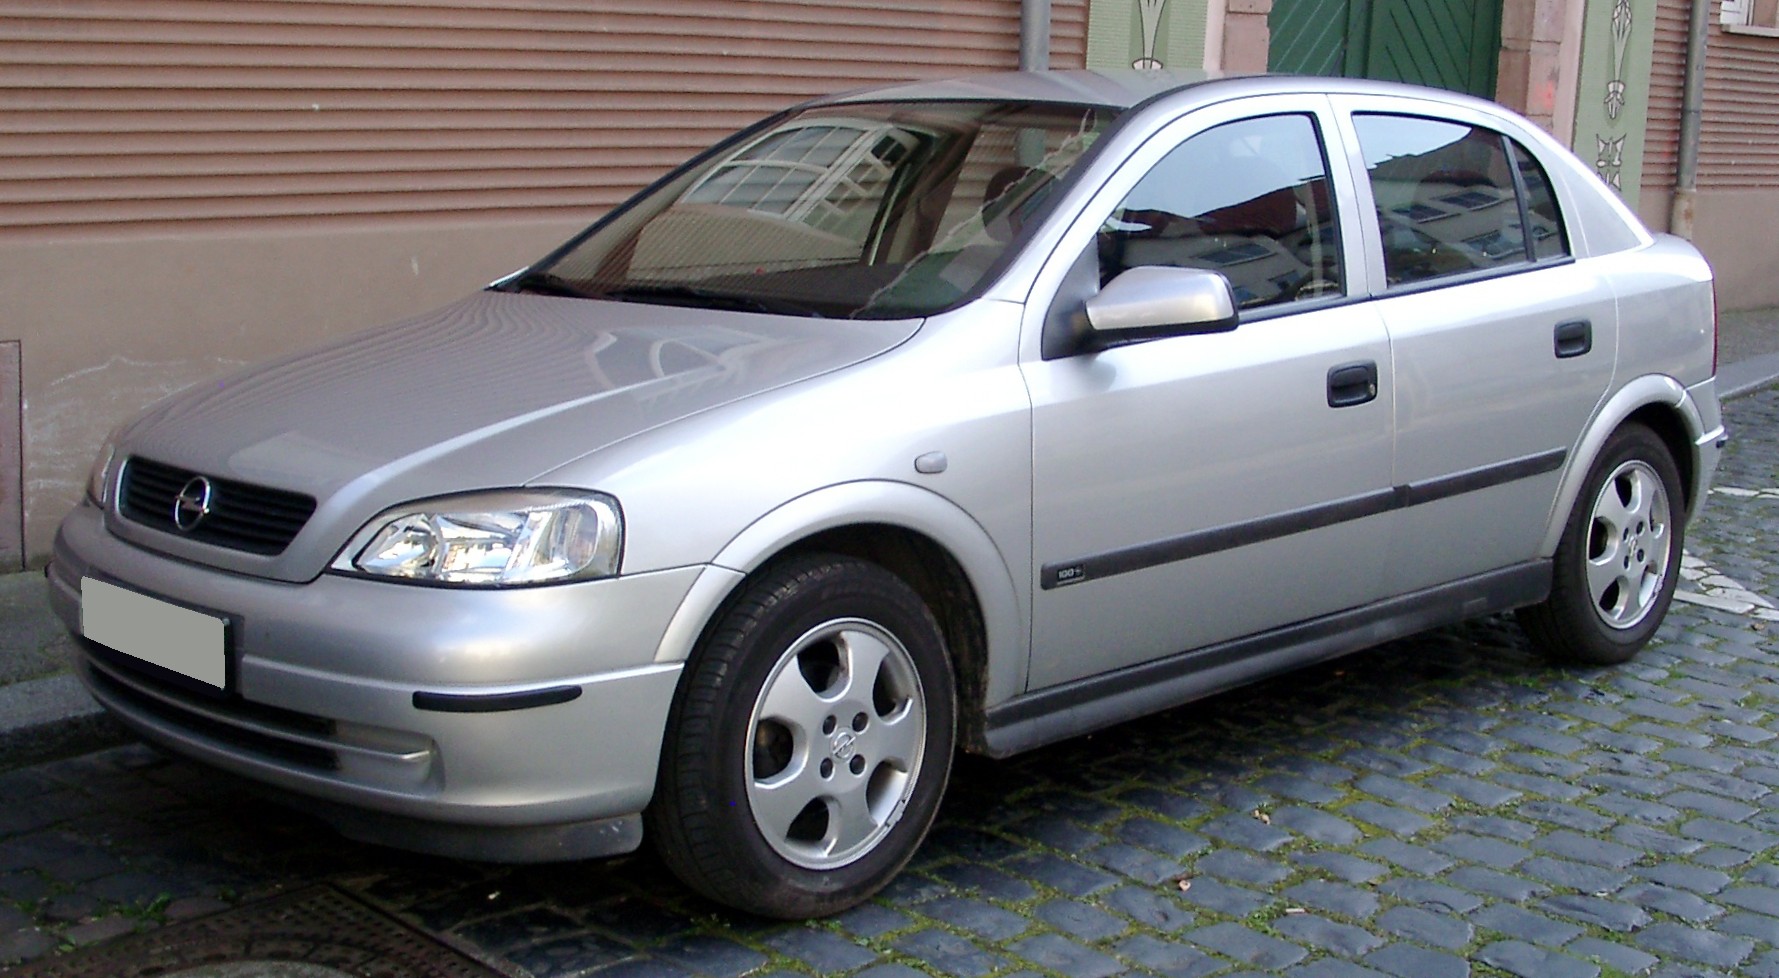 File:Opel Astra G front 20080424.jpg